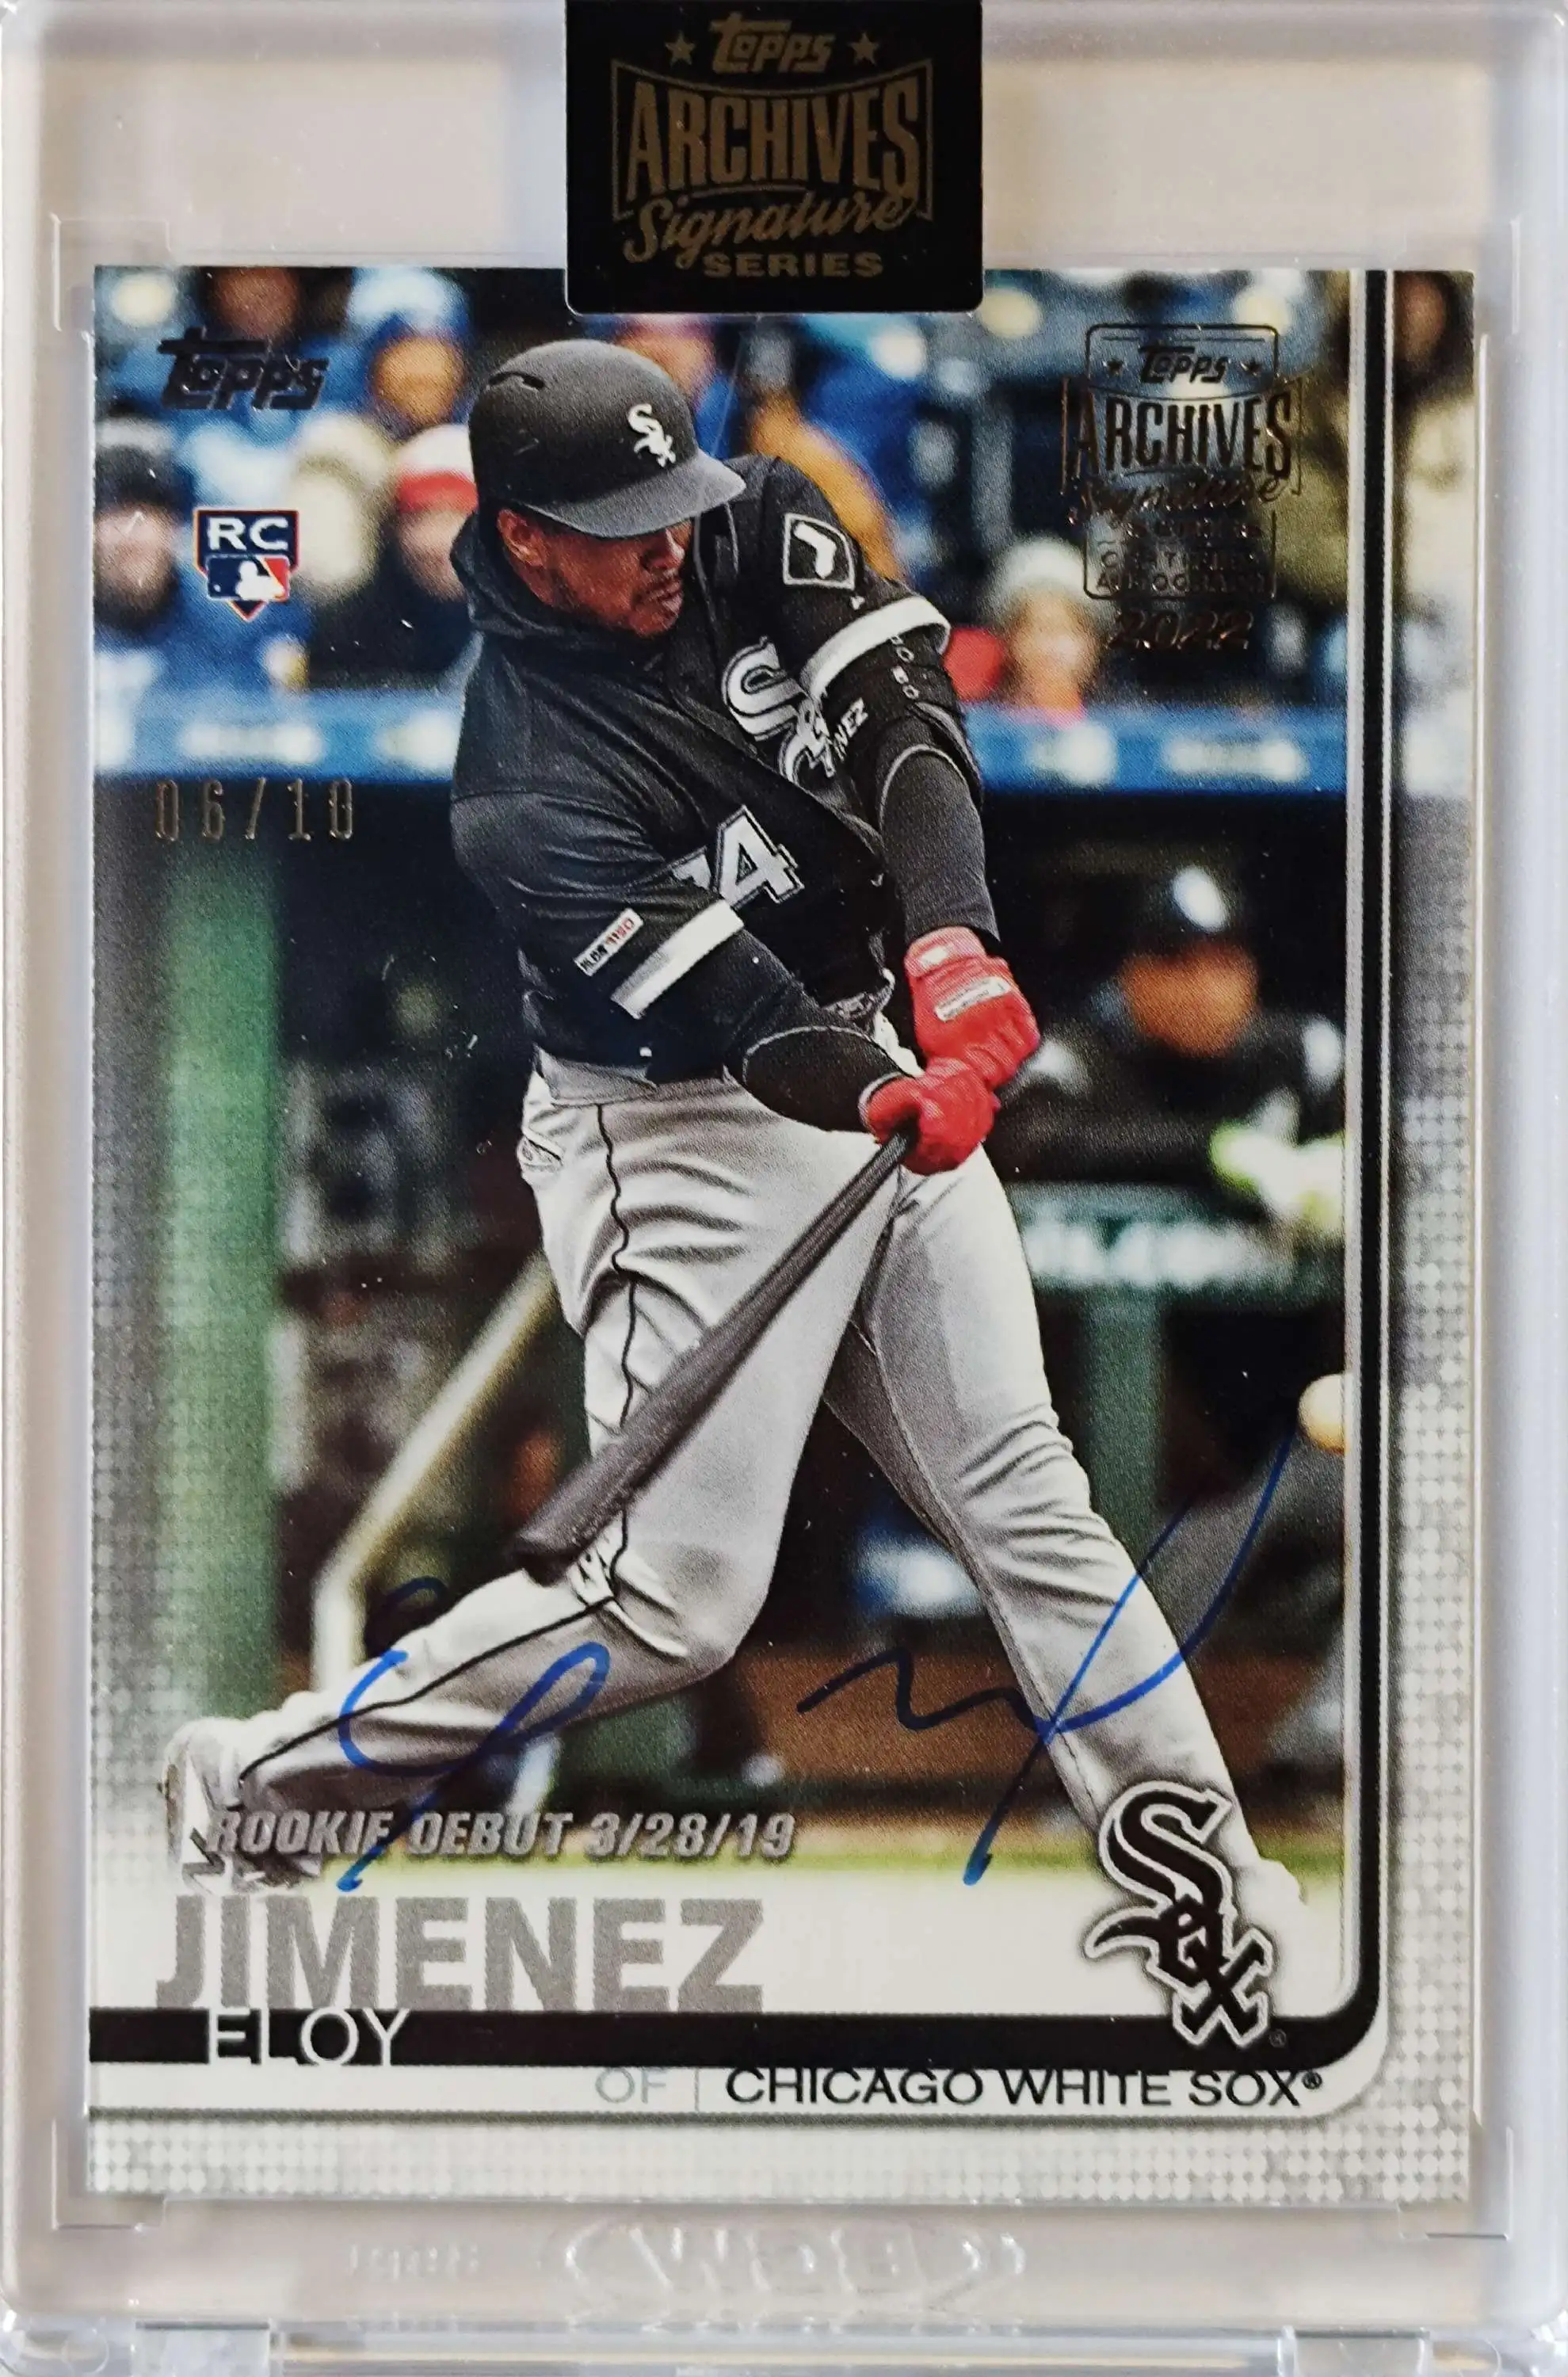 MLB 2022 Topps Archives Signature Series Jimenez Eloy 0610 Autographed  Trading Card - ToyWiz